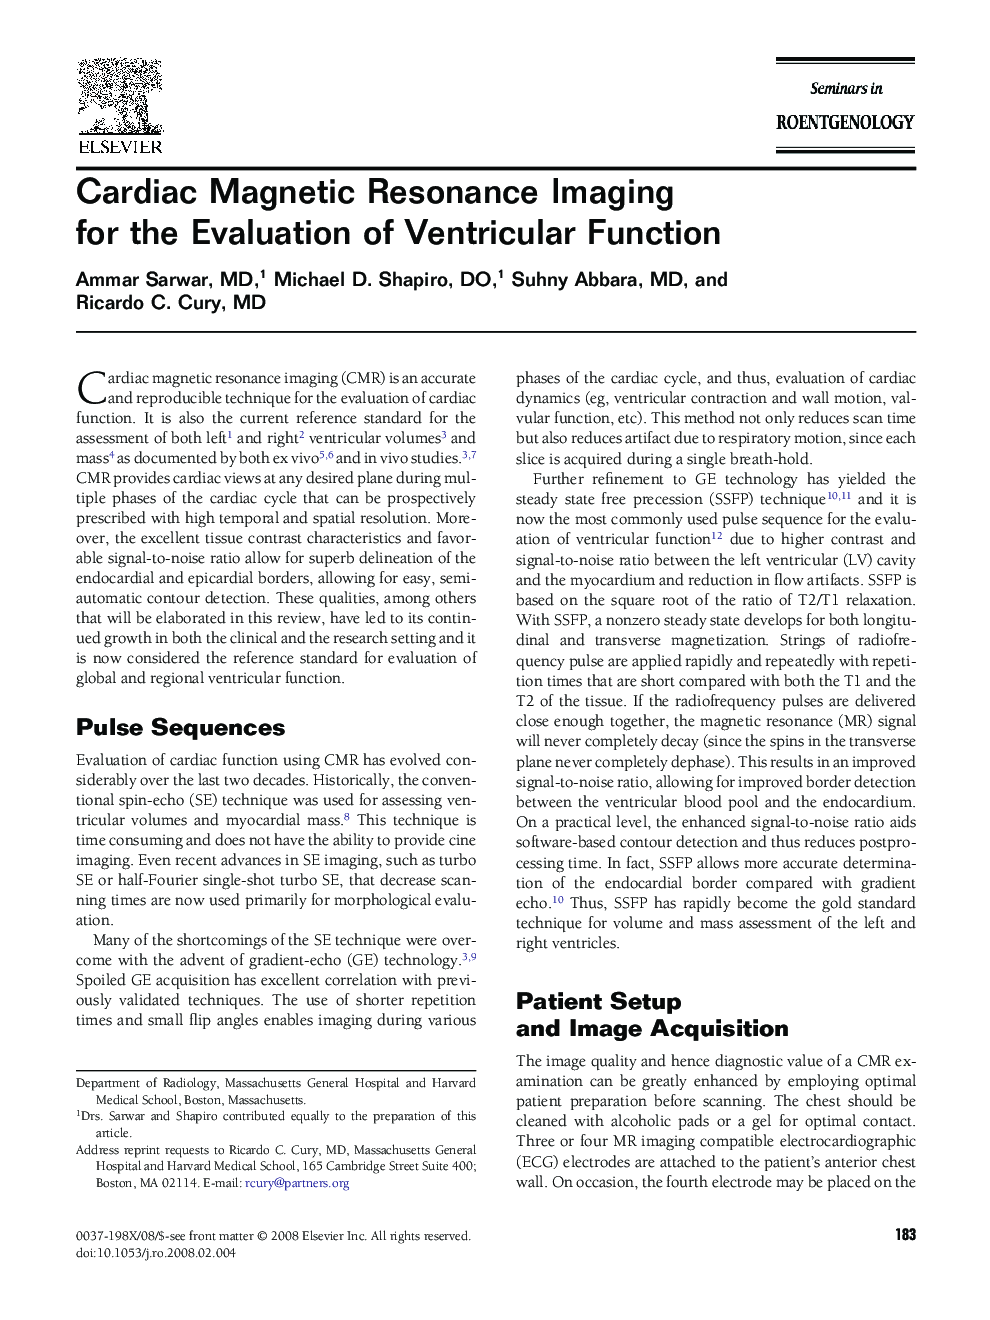 Cardiac Magnetic Resonance Imaging for the Evaluation of Ventricular Function